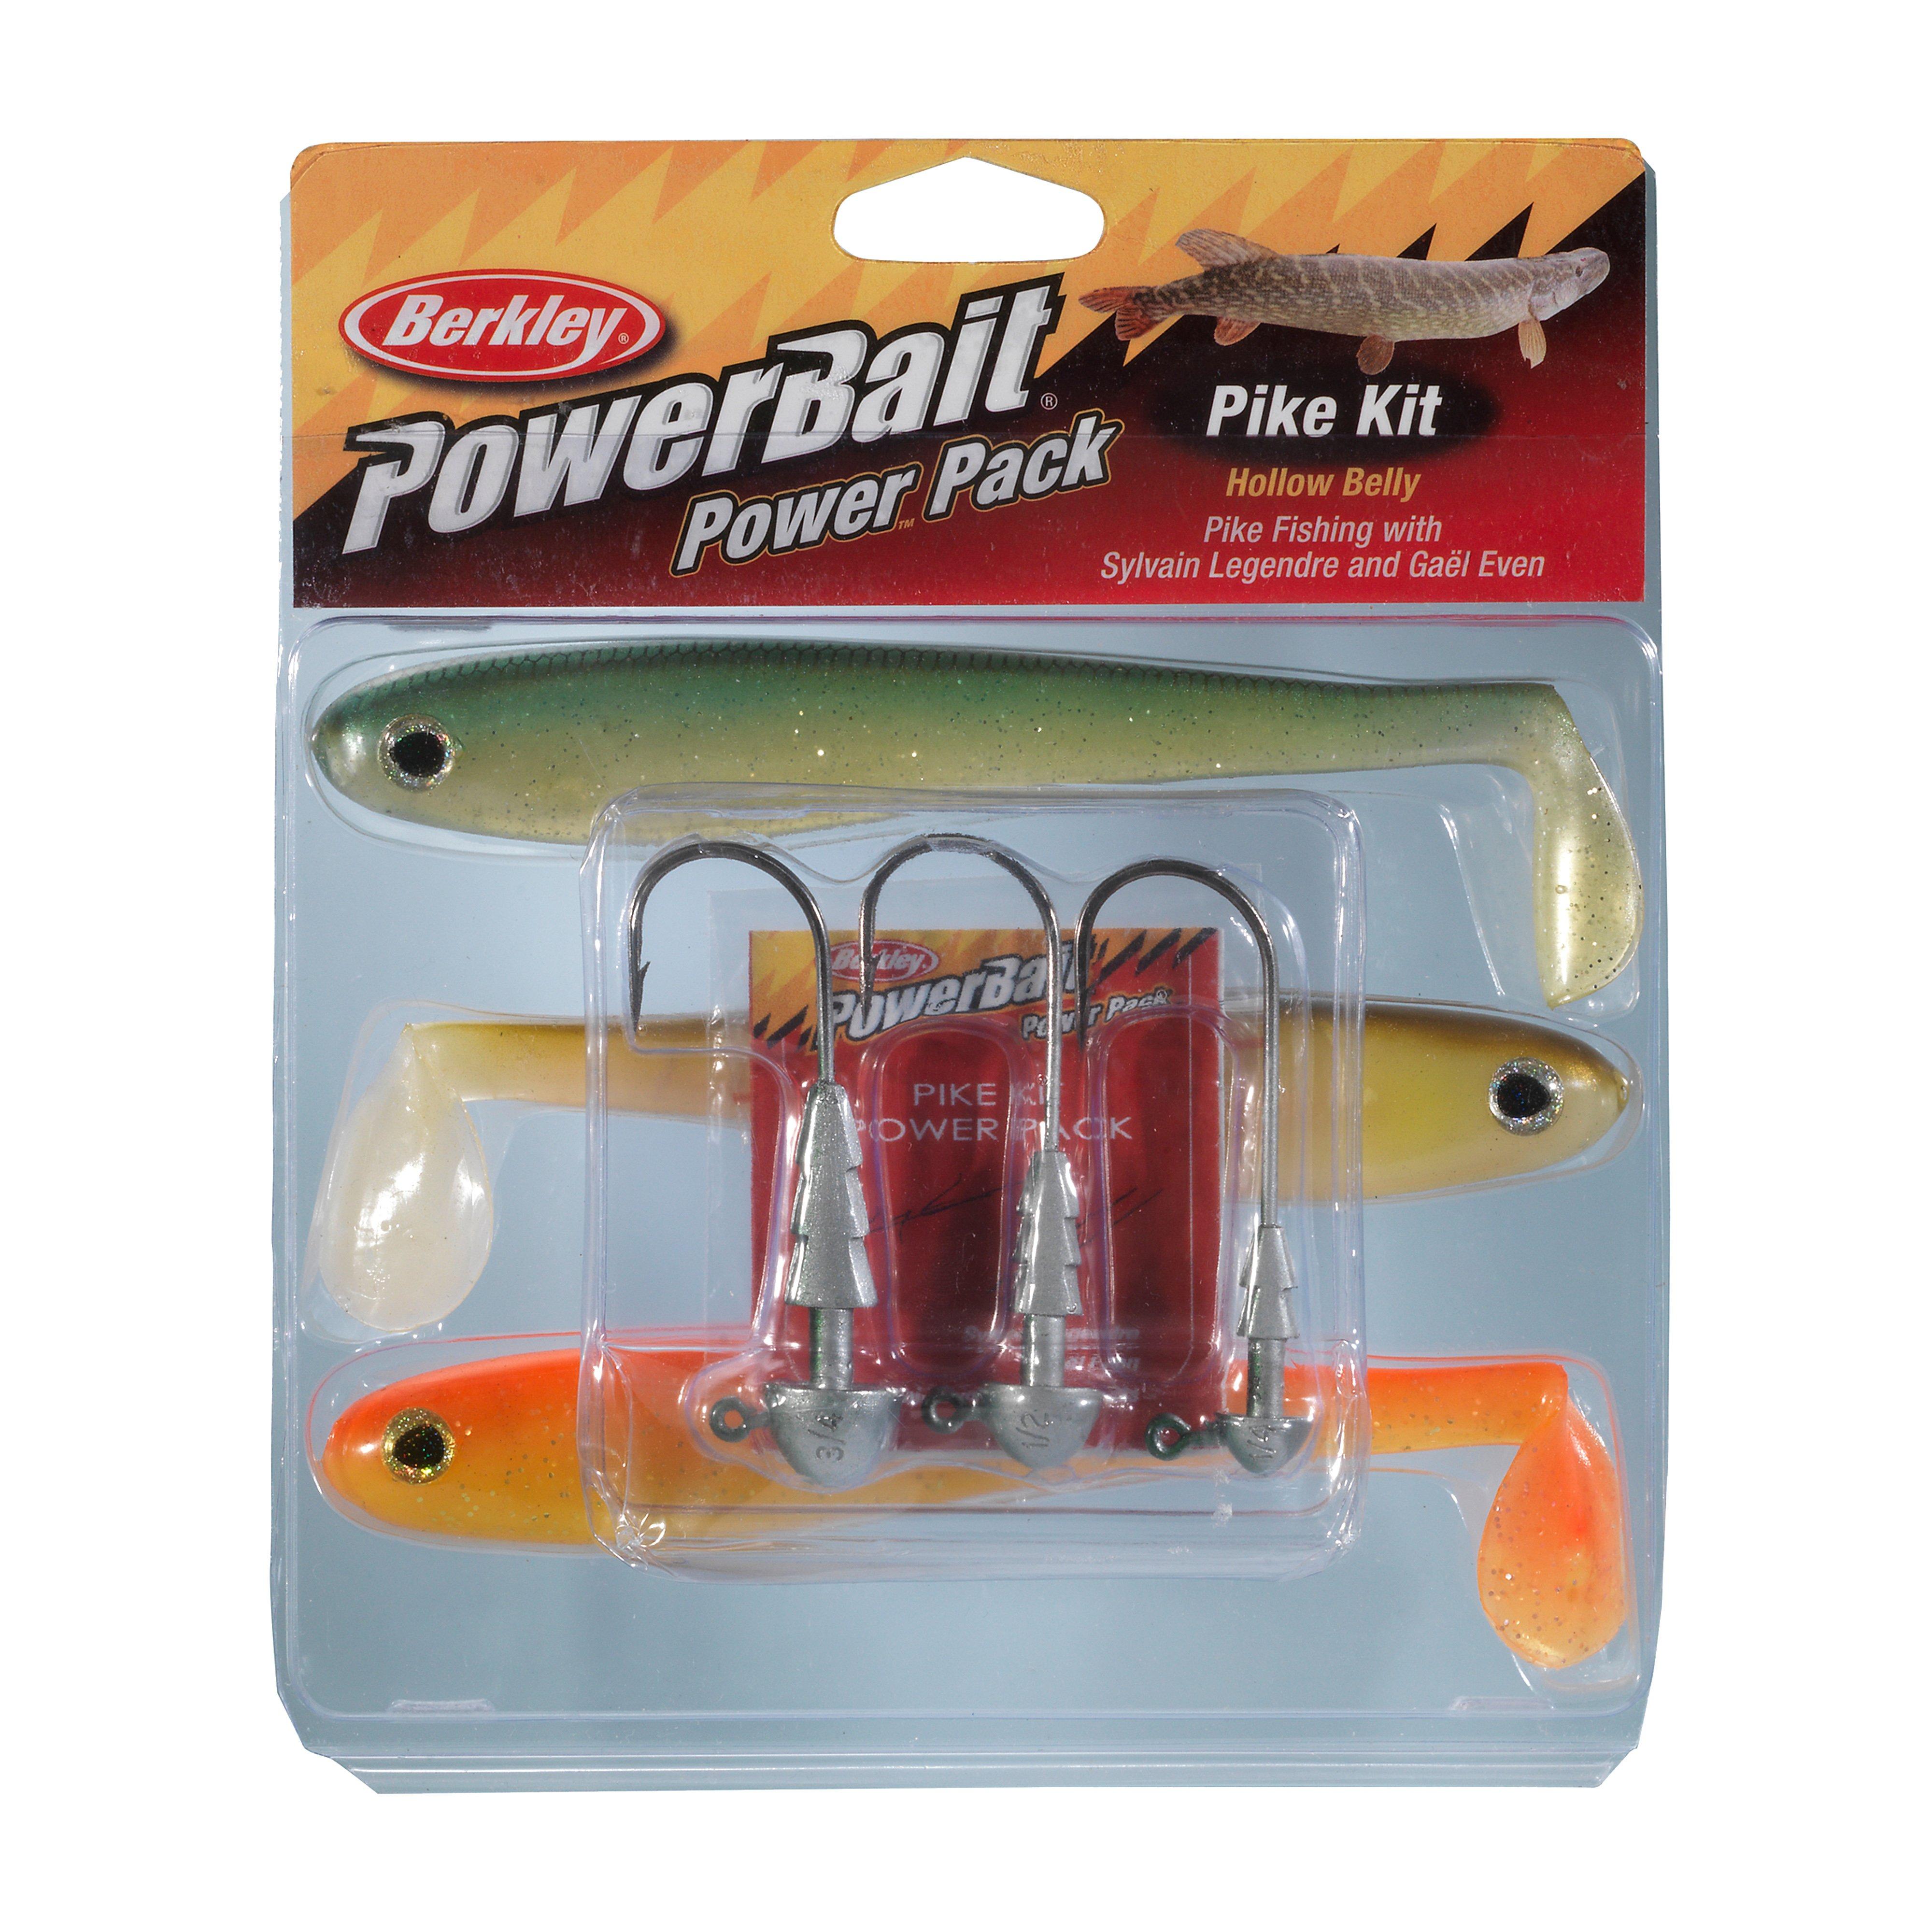 Shakespeare Powerbait Pike Hollow Belly Pro Pack Review